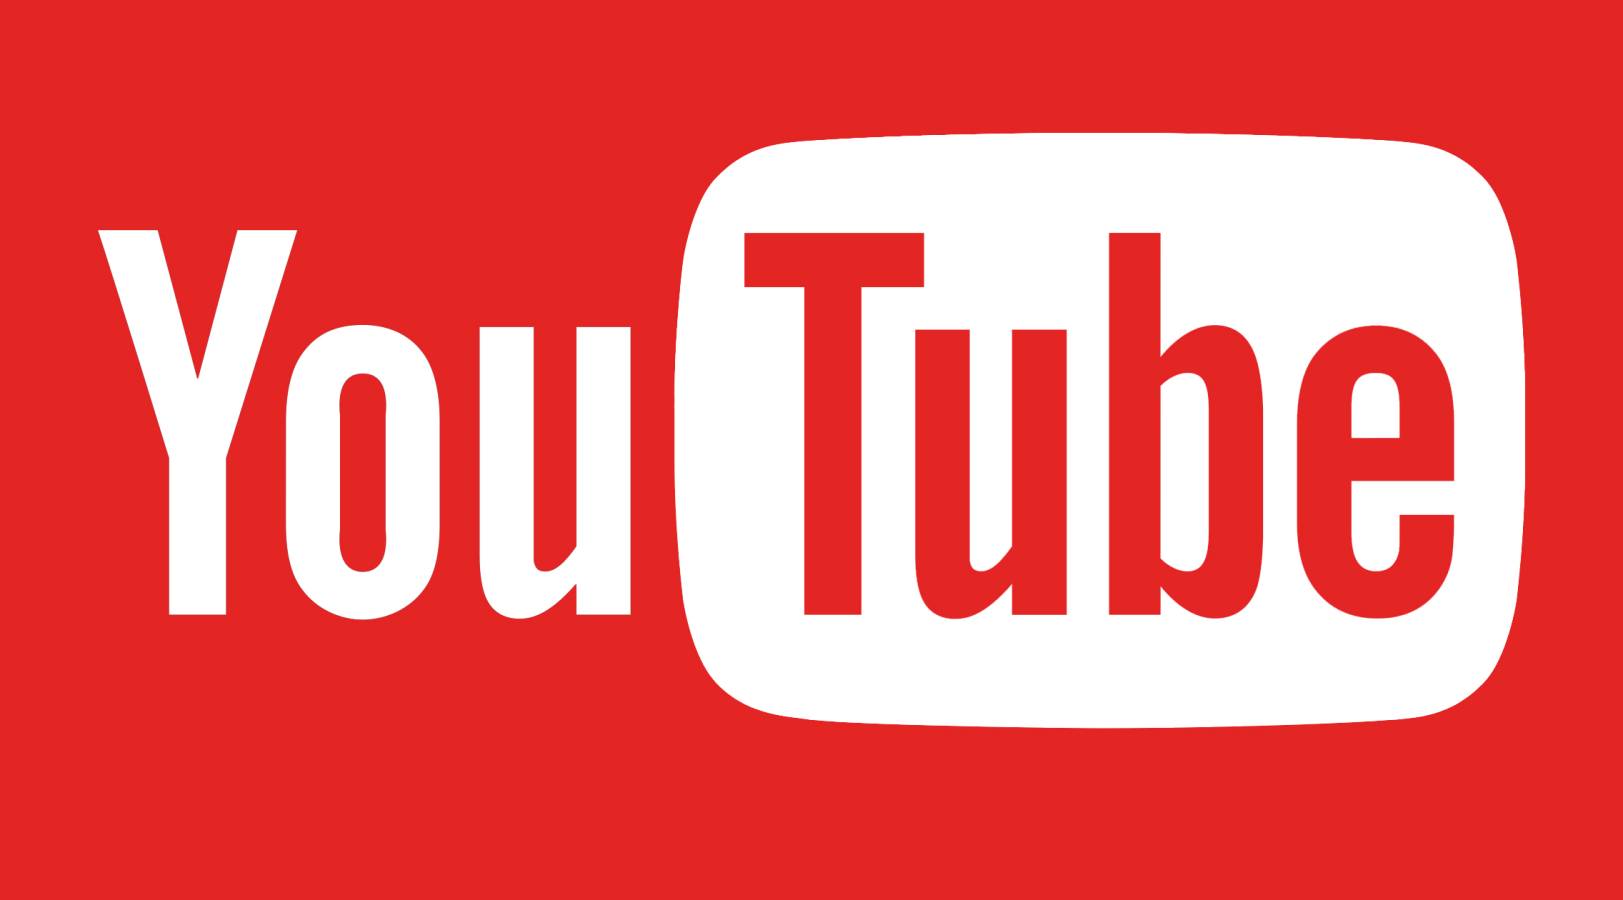 YouTube Update New Offer for Phones and Tablets Today